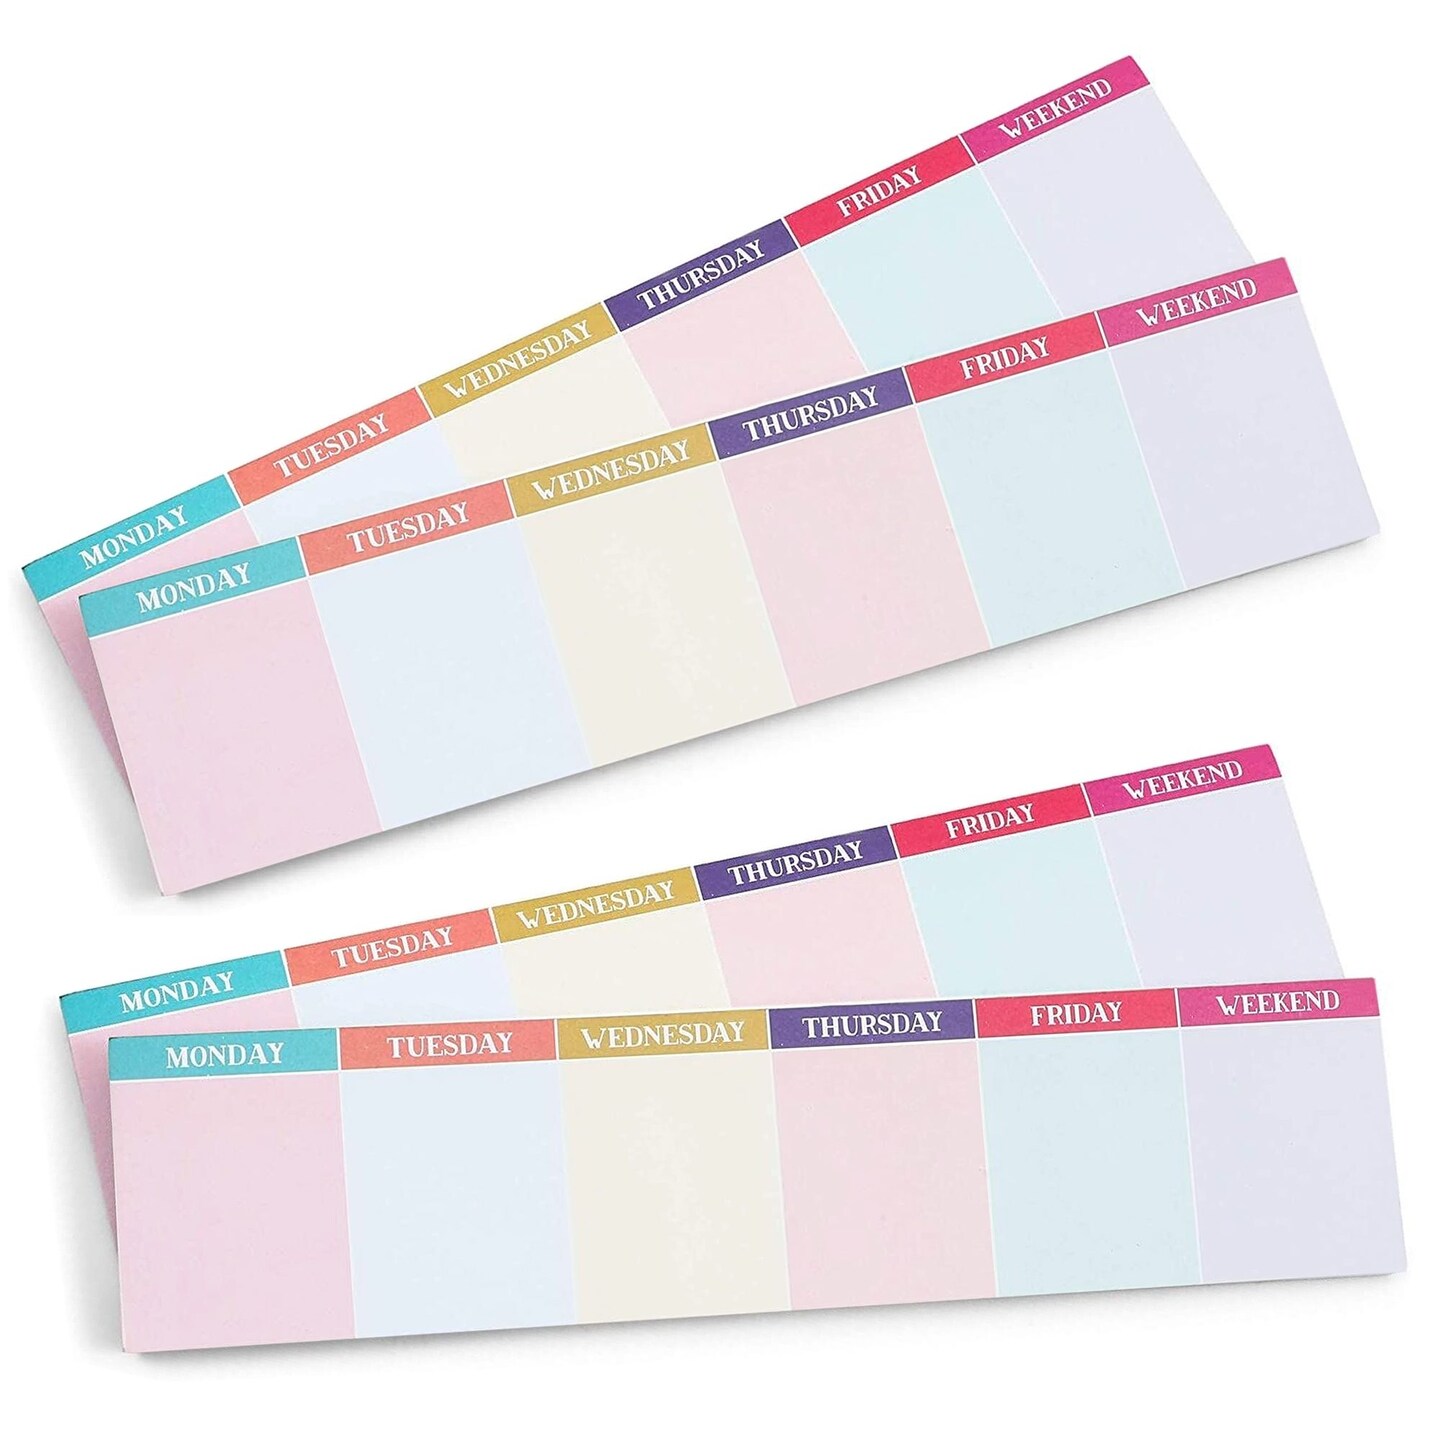 2 Pack Weekly Planner Sticky Notes, Calendar Note Pad for Tasks, ToDo